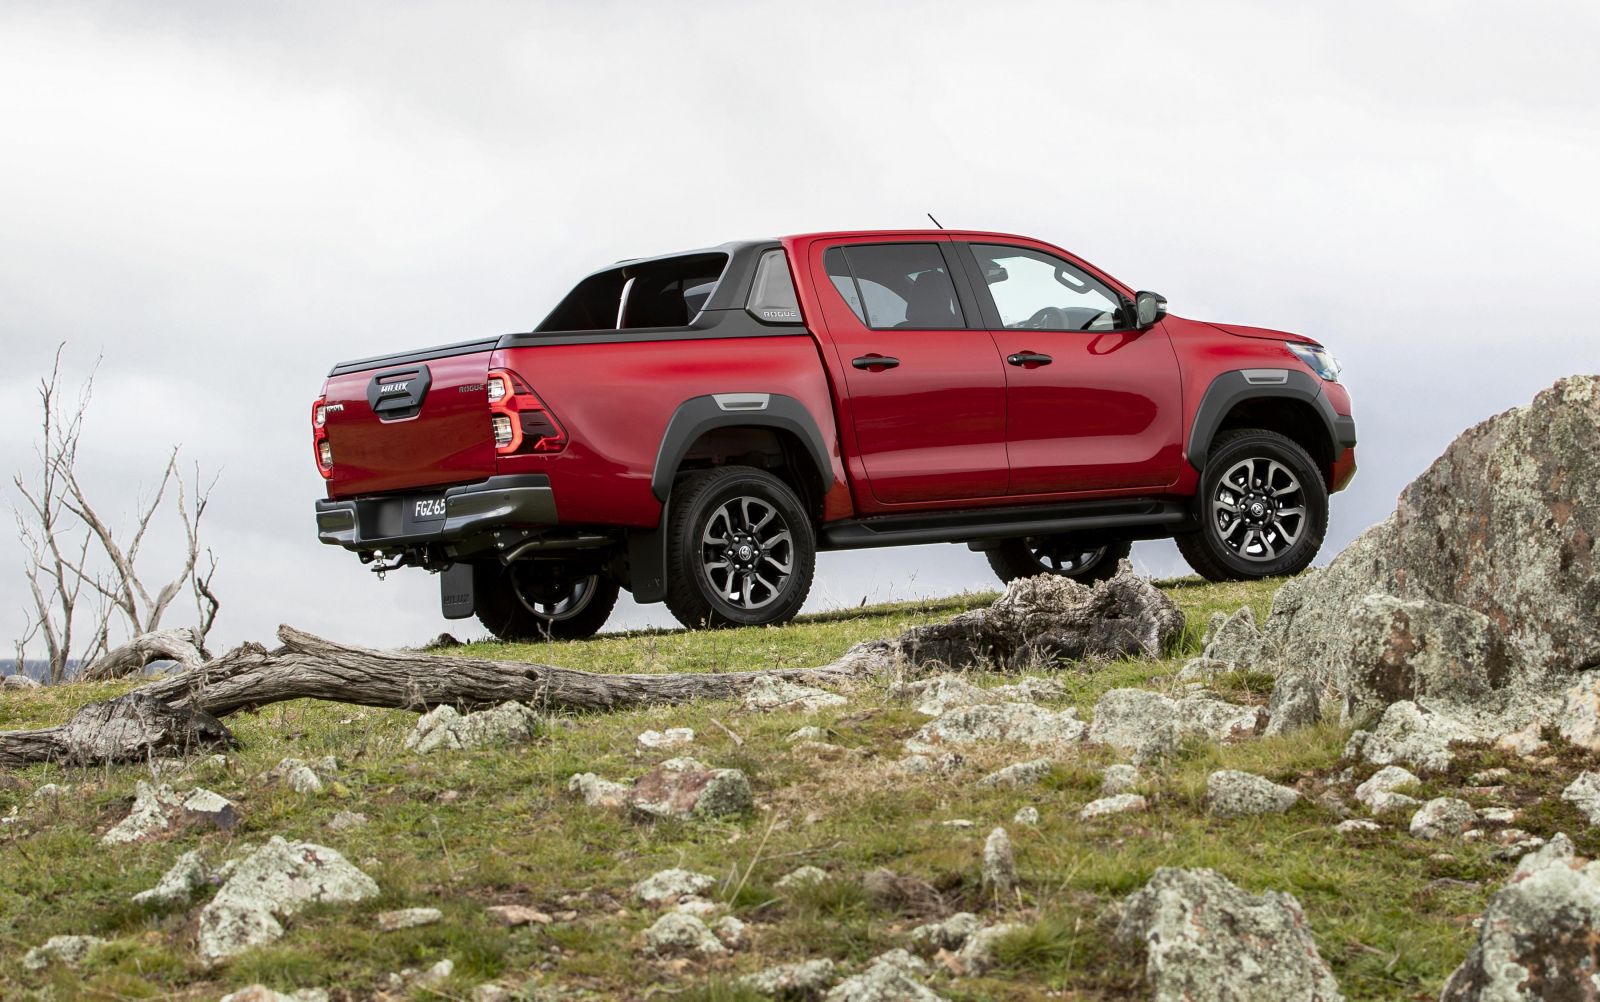 2022 Toyota HiLux price and specs  CarExpert